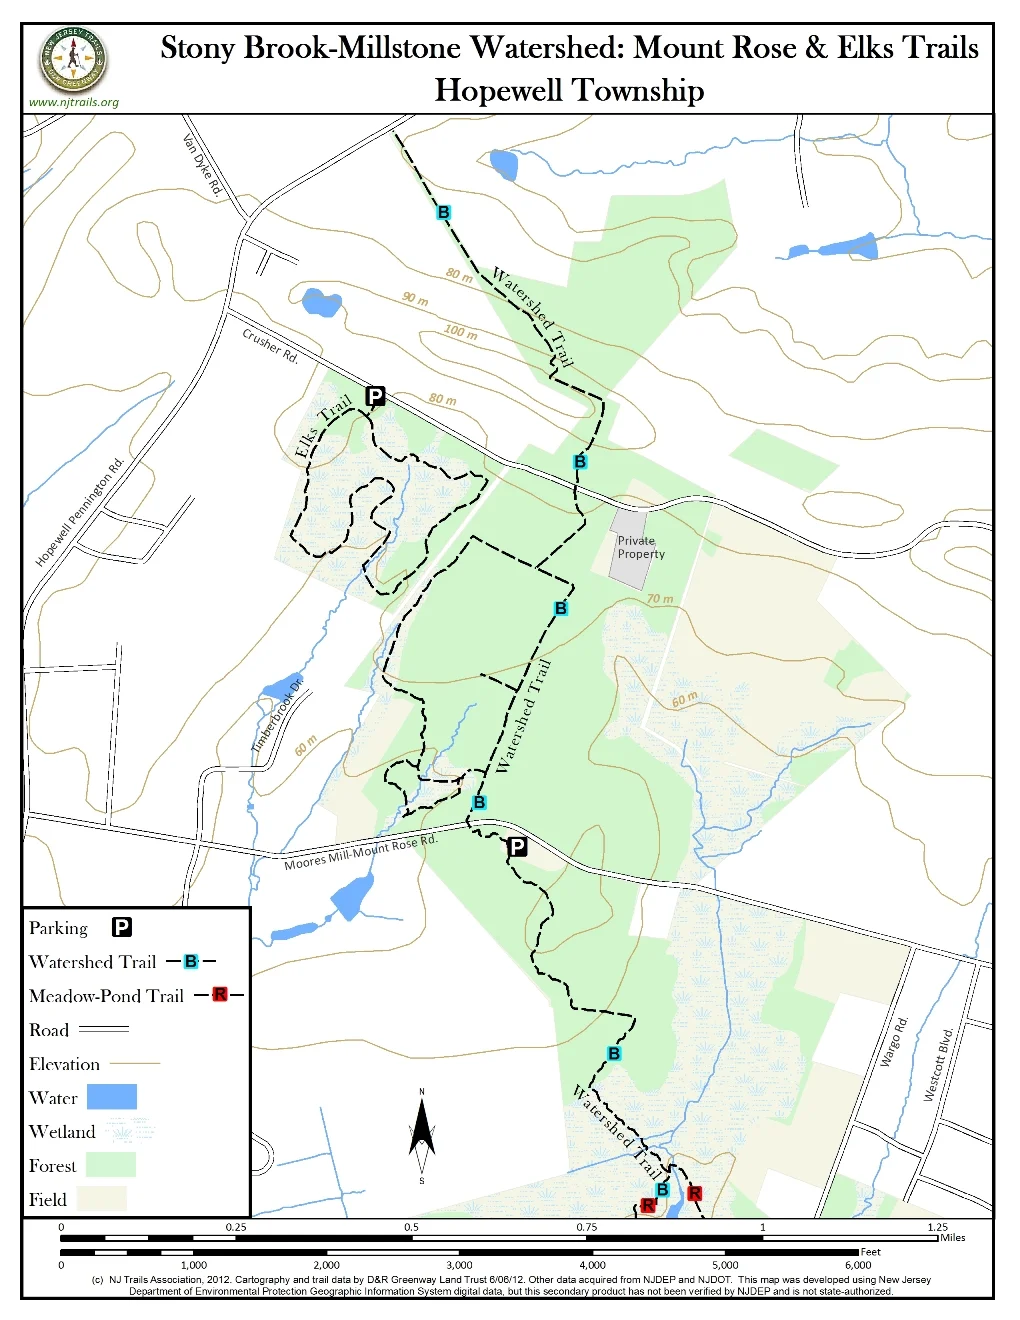 Stony Brook-Millstone Watershed: Mount Rose Trails